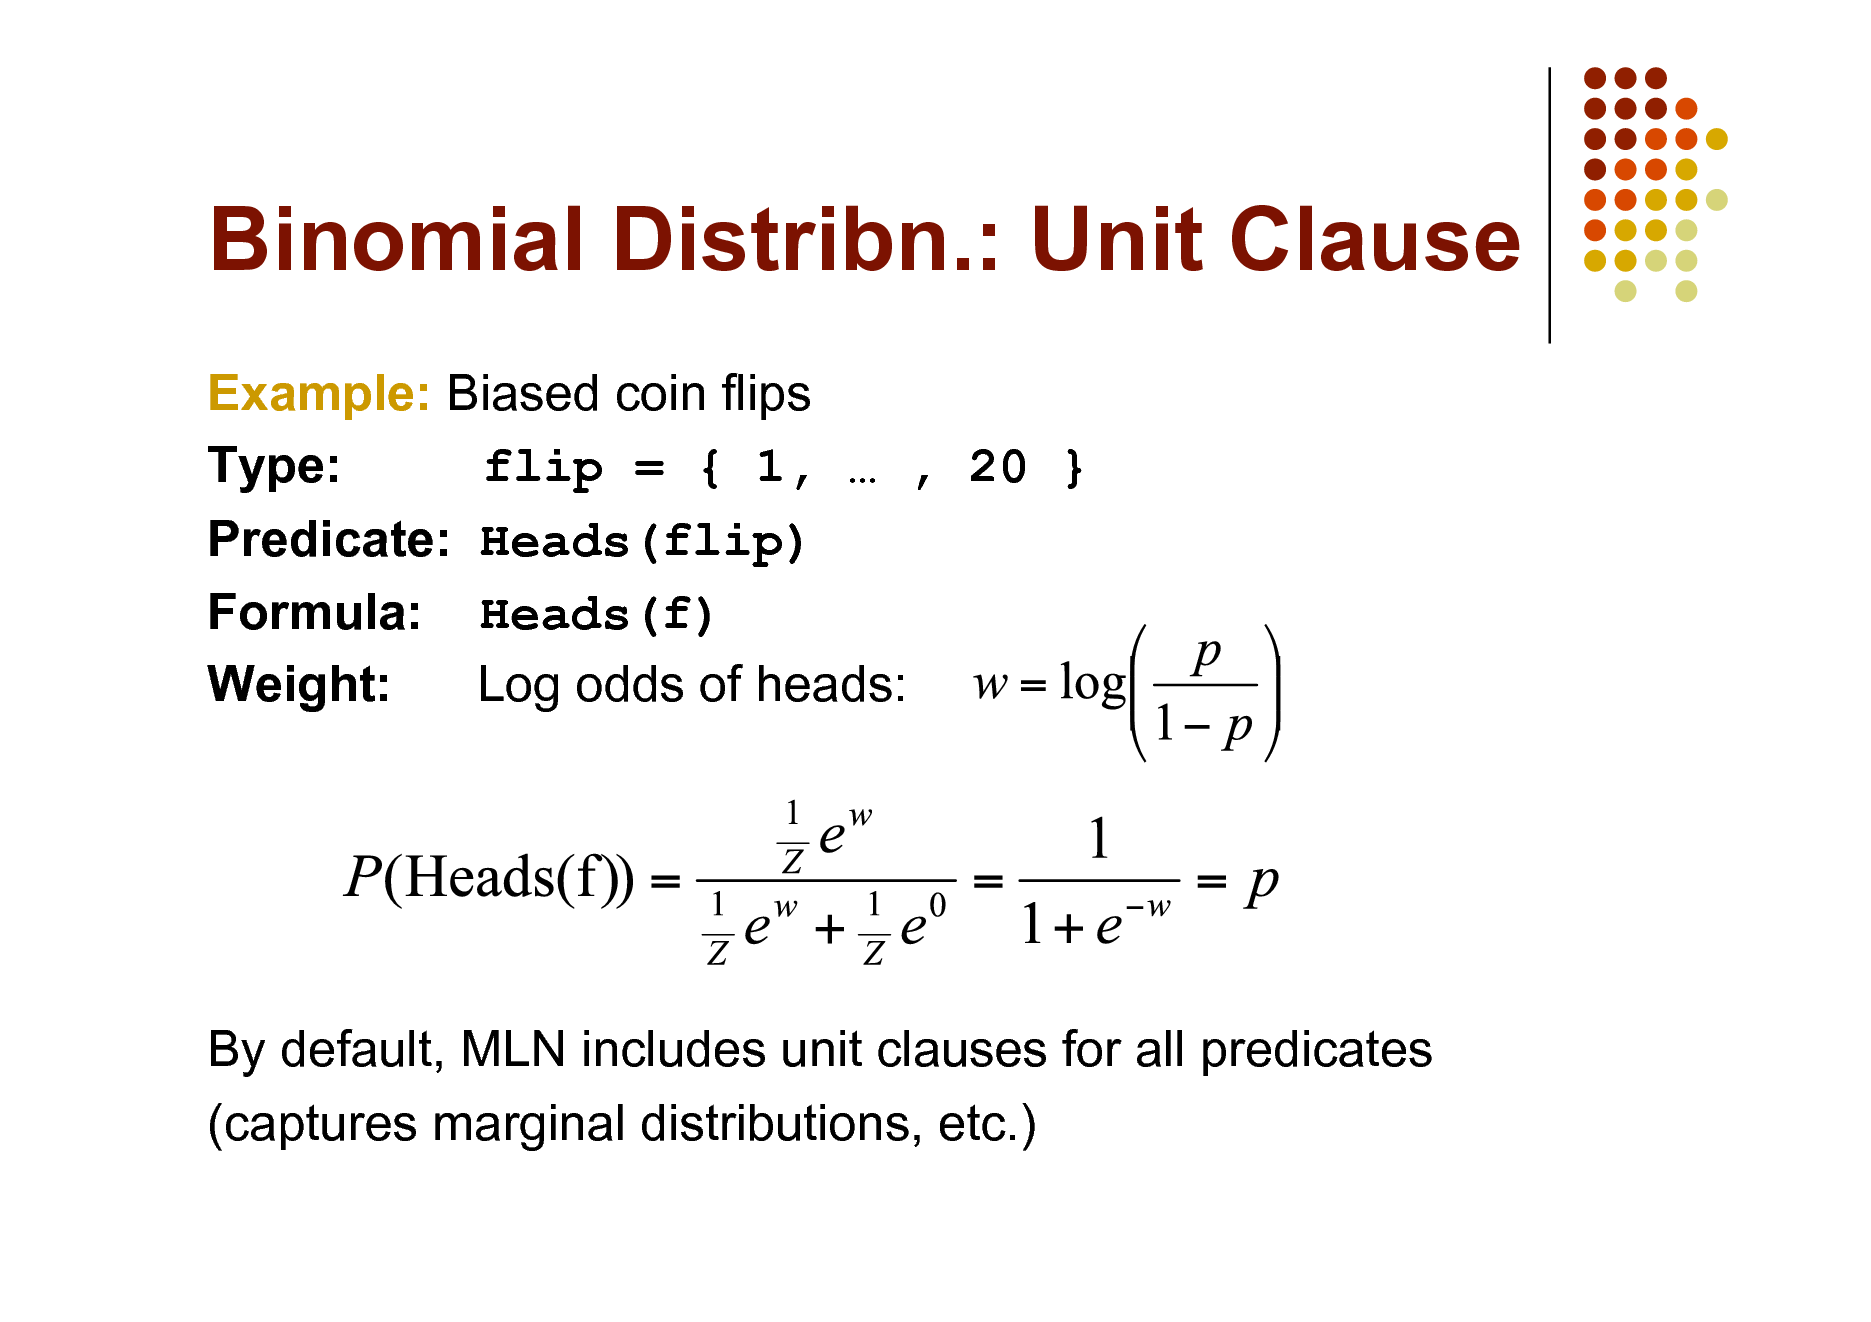 Slide: Binomial Distribn.: Unit Clause
Example: Biased coin flips Type: flip = { 1,  , 20 } Predicate: Heads(flip) Formula: Heads(f) Weight: Log odds of heads:

By default, MLN includes unit clauses for all predicates (captures marginal distributions, etc.)

